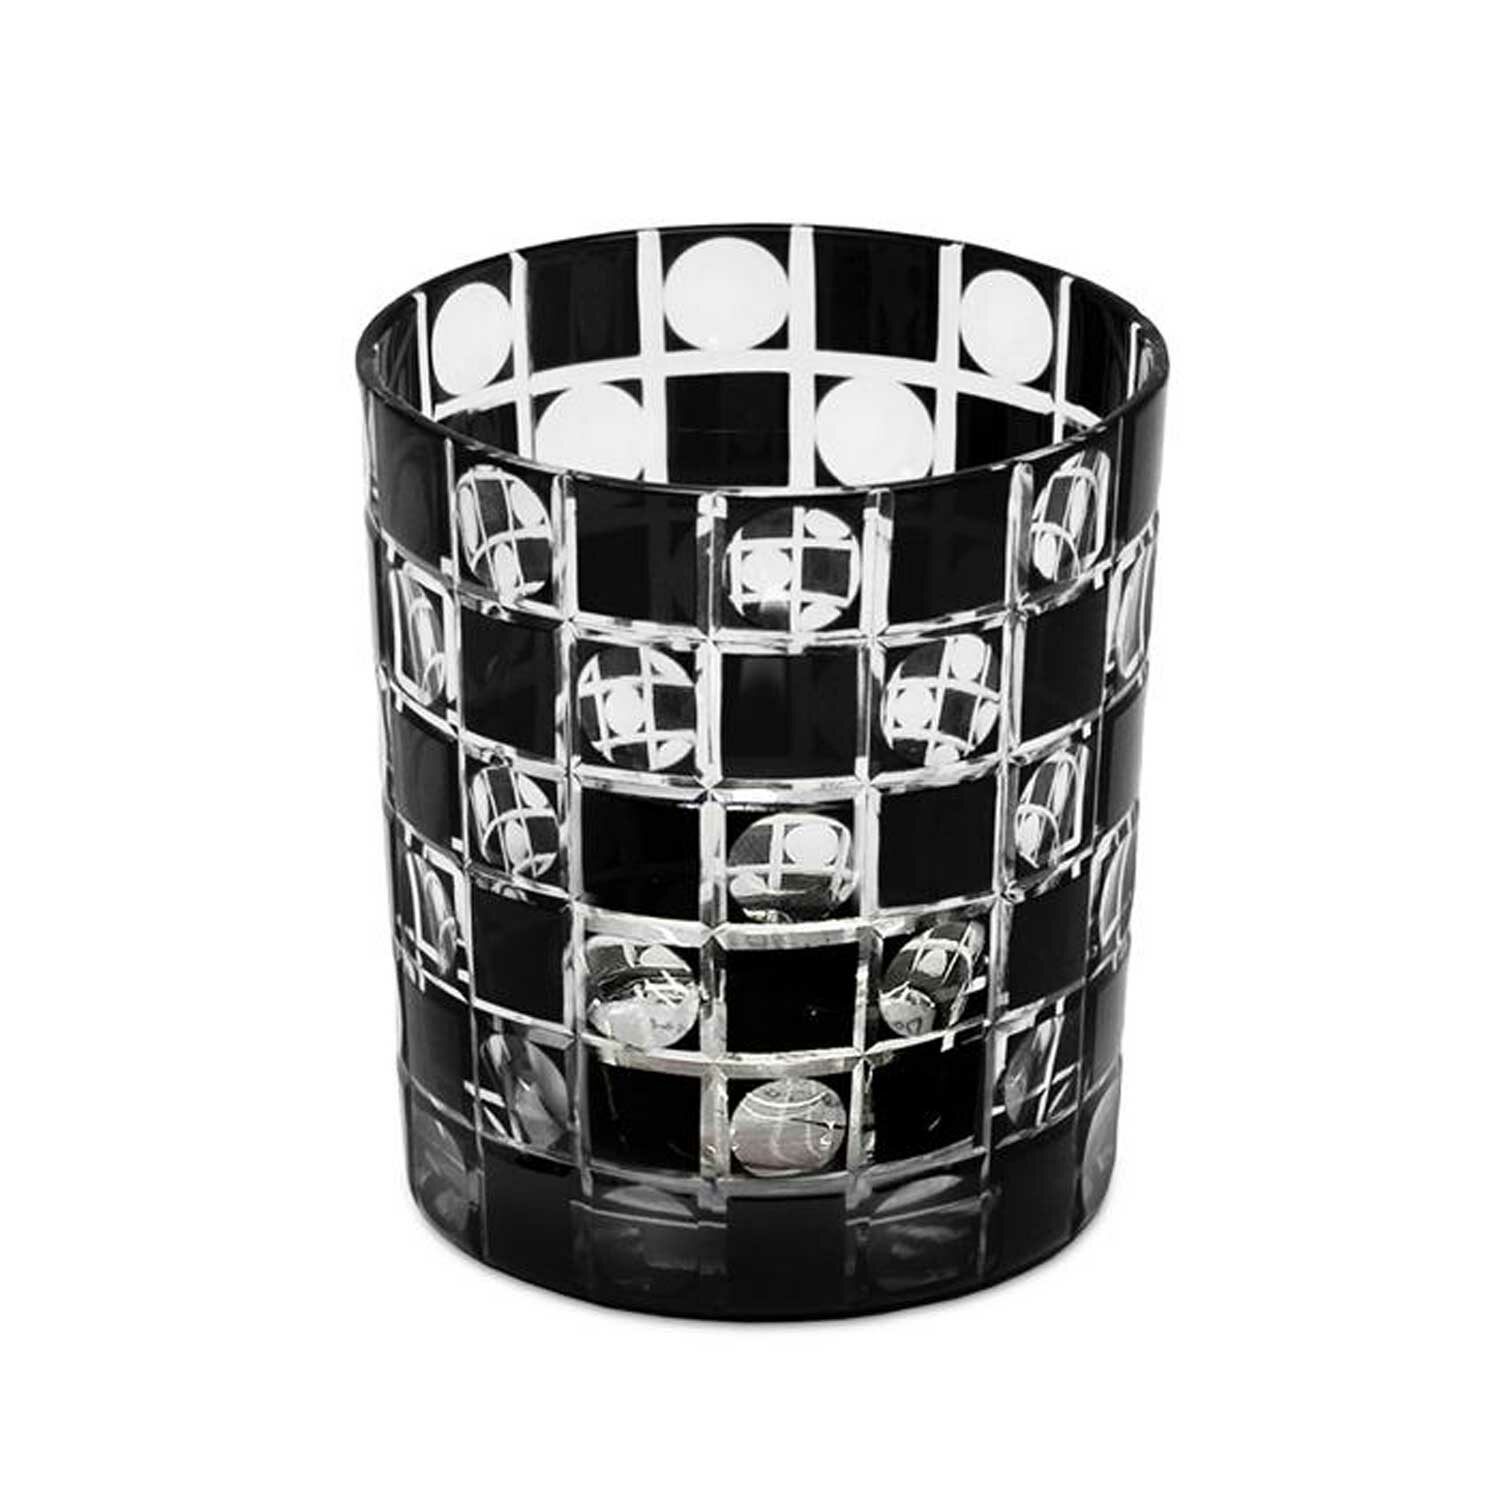 DIEGO crystal glass (checkerboard pattern) black set of 4